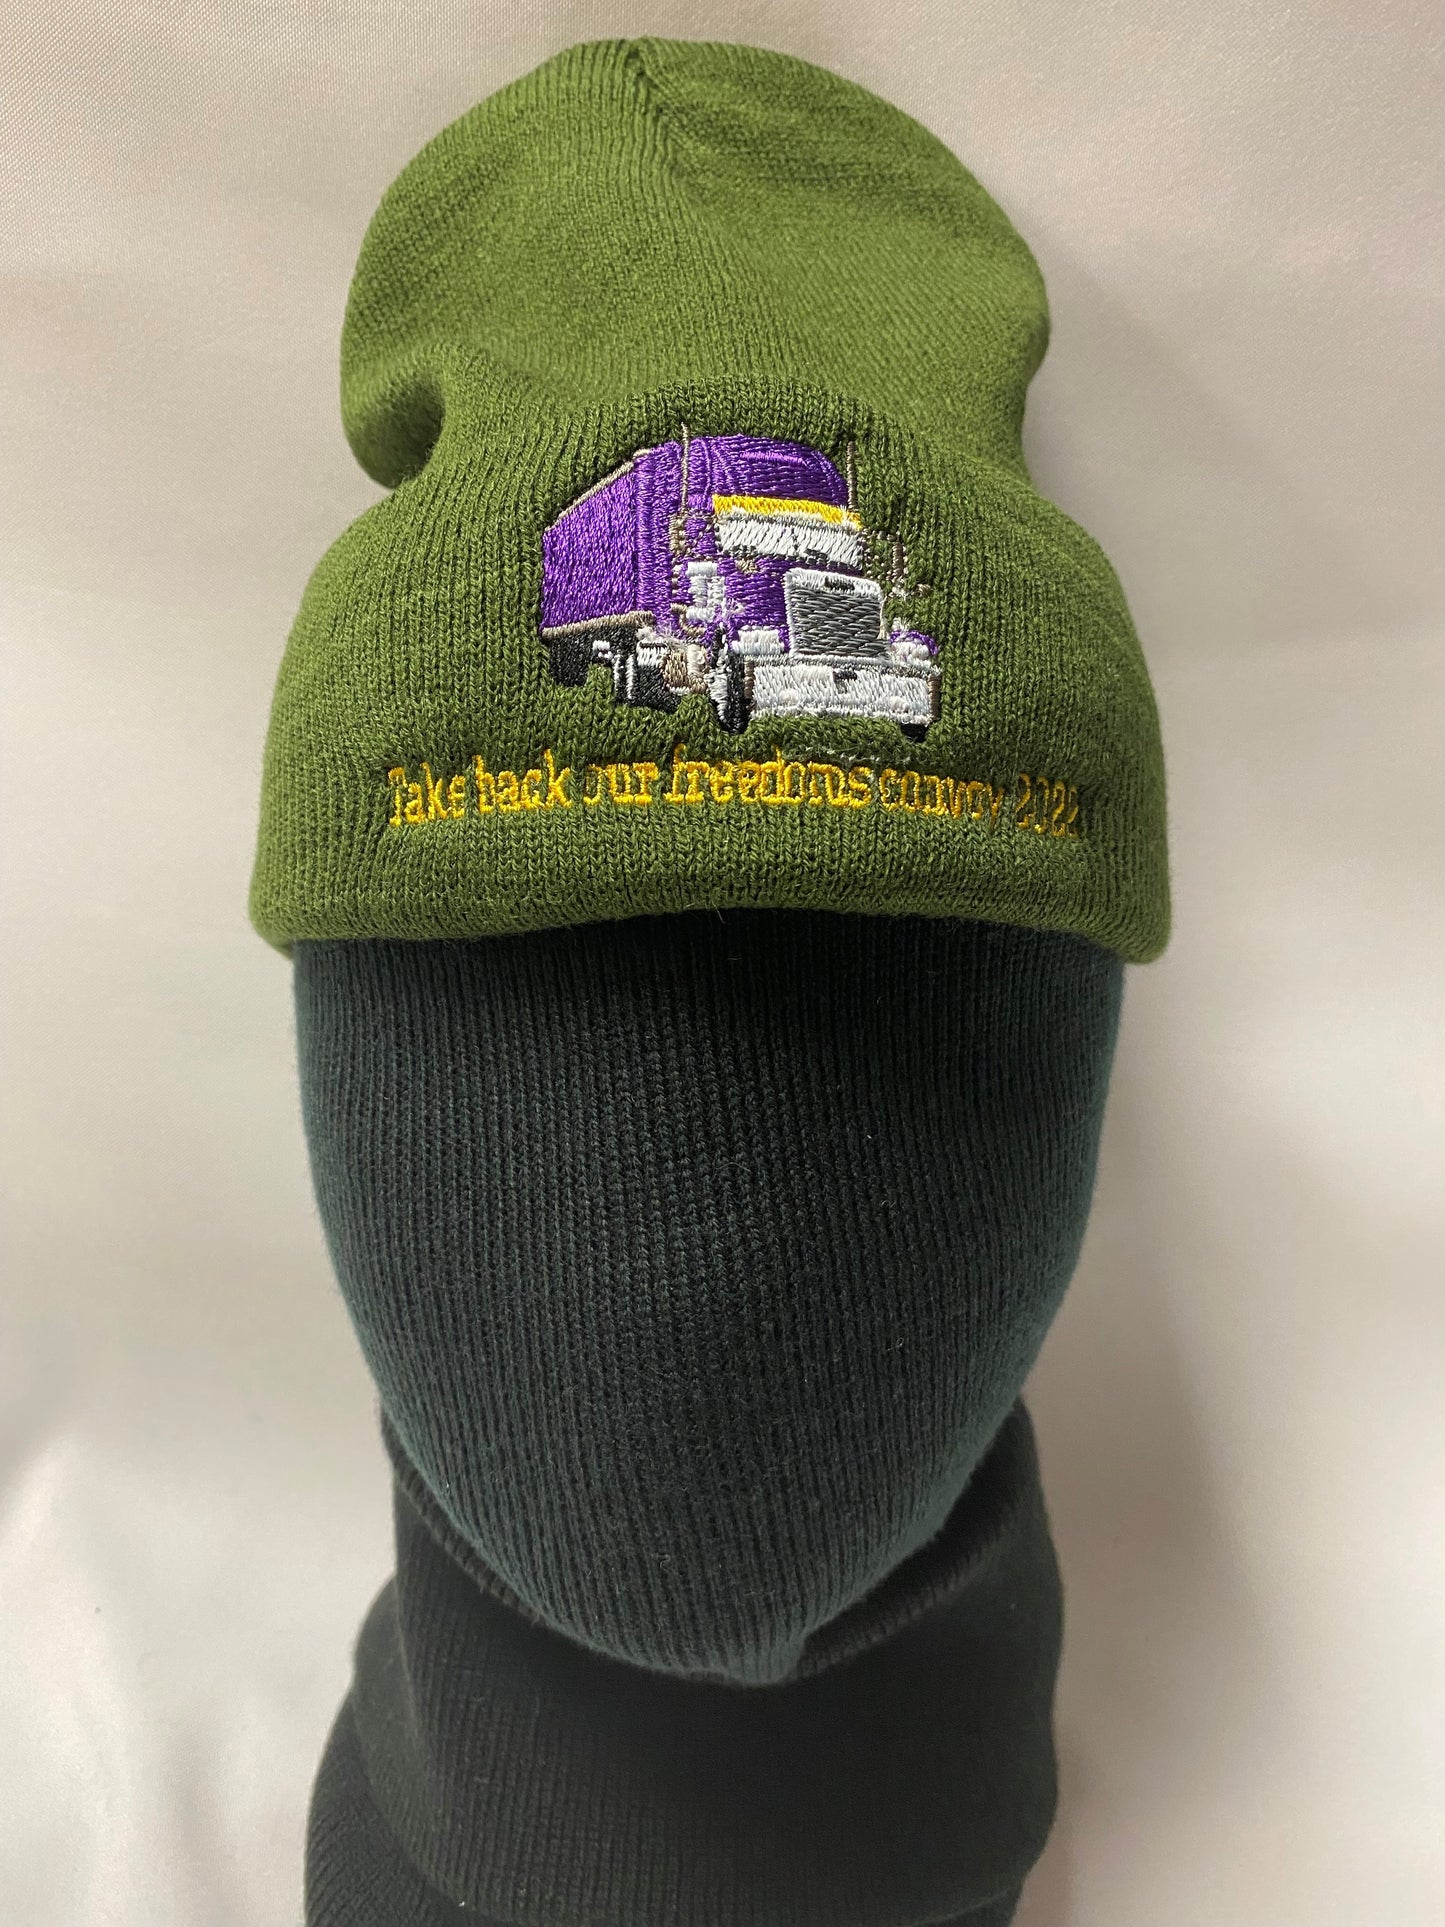 TRUCKER TOQUE Multiple colors: "Take back our freedoms convoy 2022"